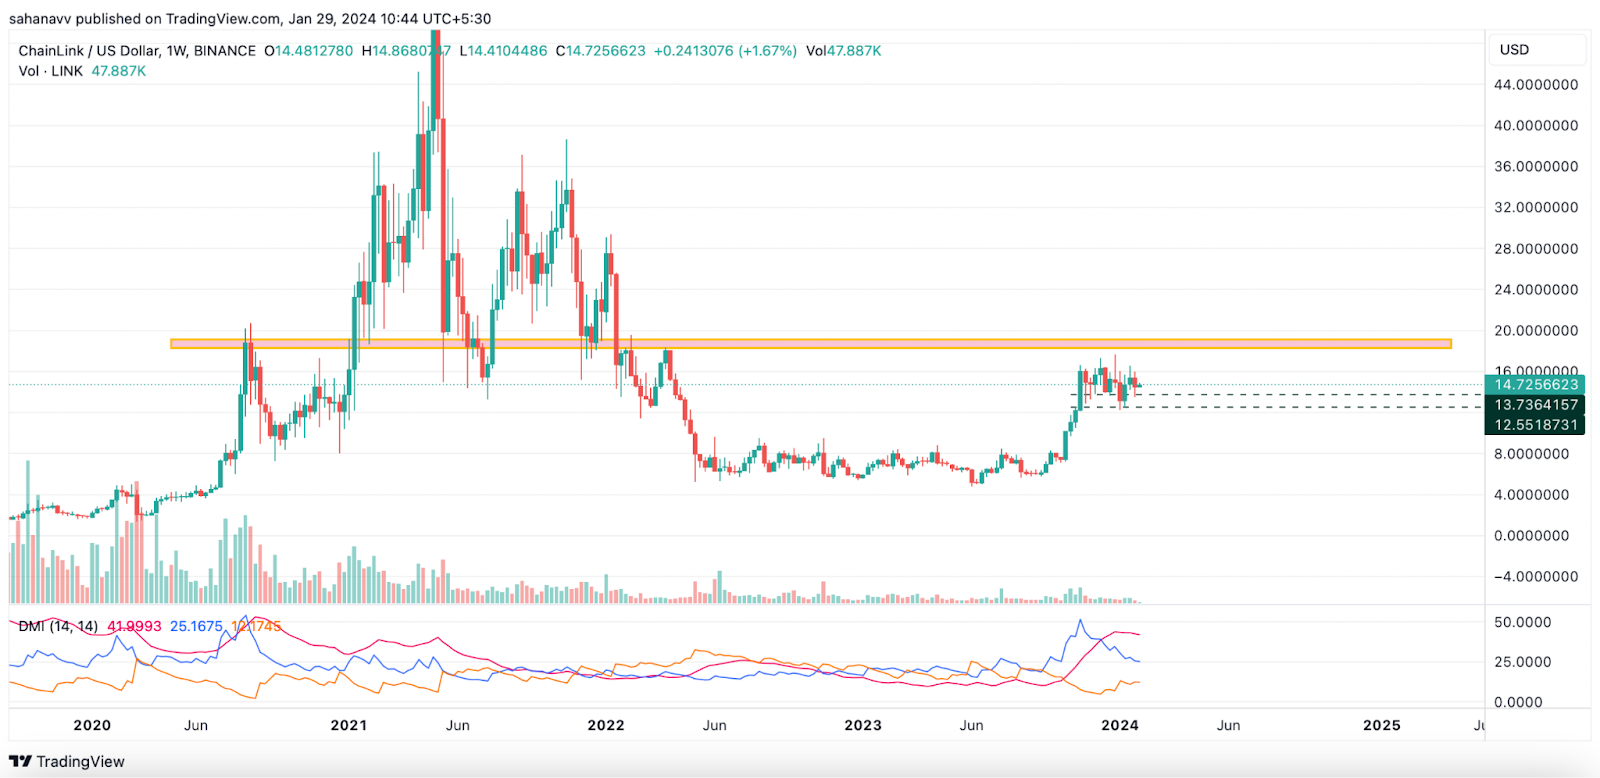 Has Chainlink’s (LINK) Price Entered the Next Consolidation Phase Between  and ?